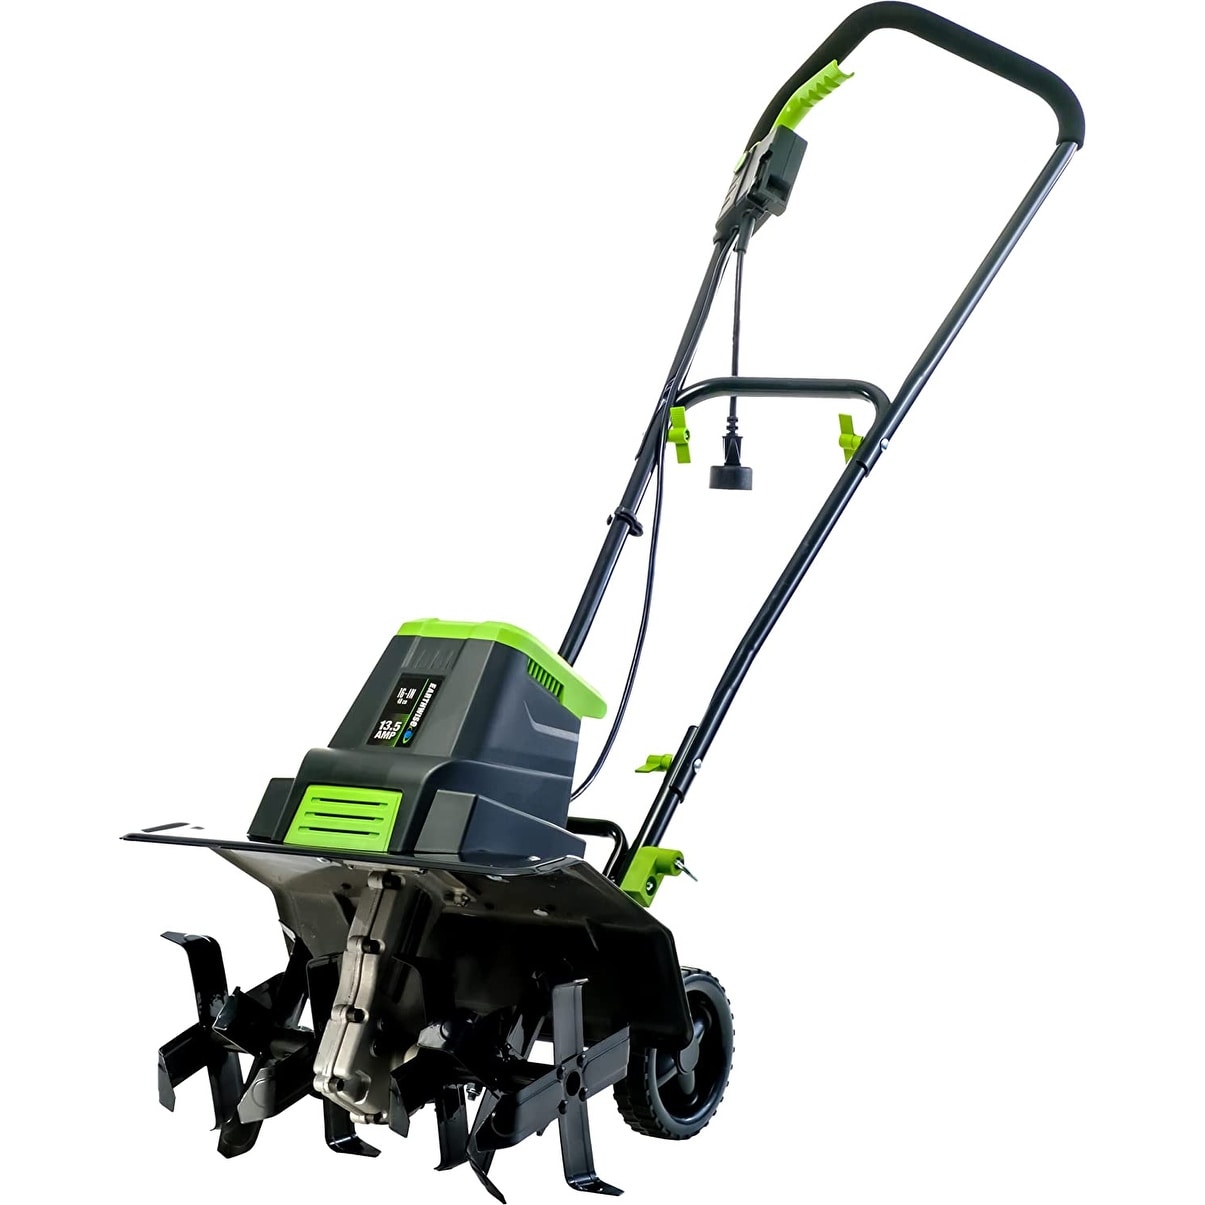 Earthwise 13.5-Amp 16-Inch Electric Garden Tiller Cultivator, Fixed Tines,  Black On Sale Bed Bath  Beyond 36342741